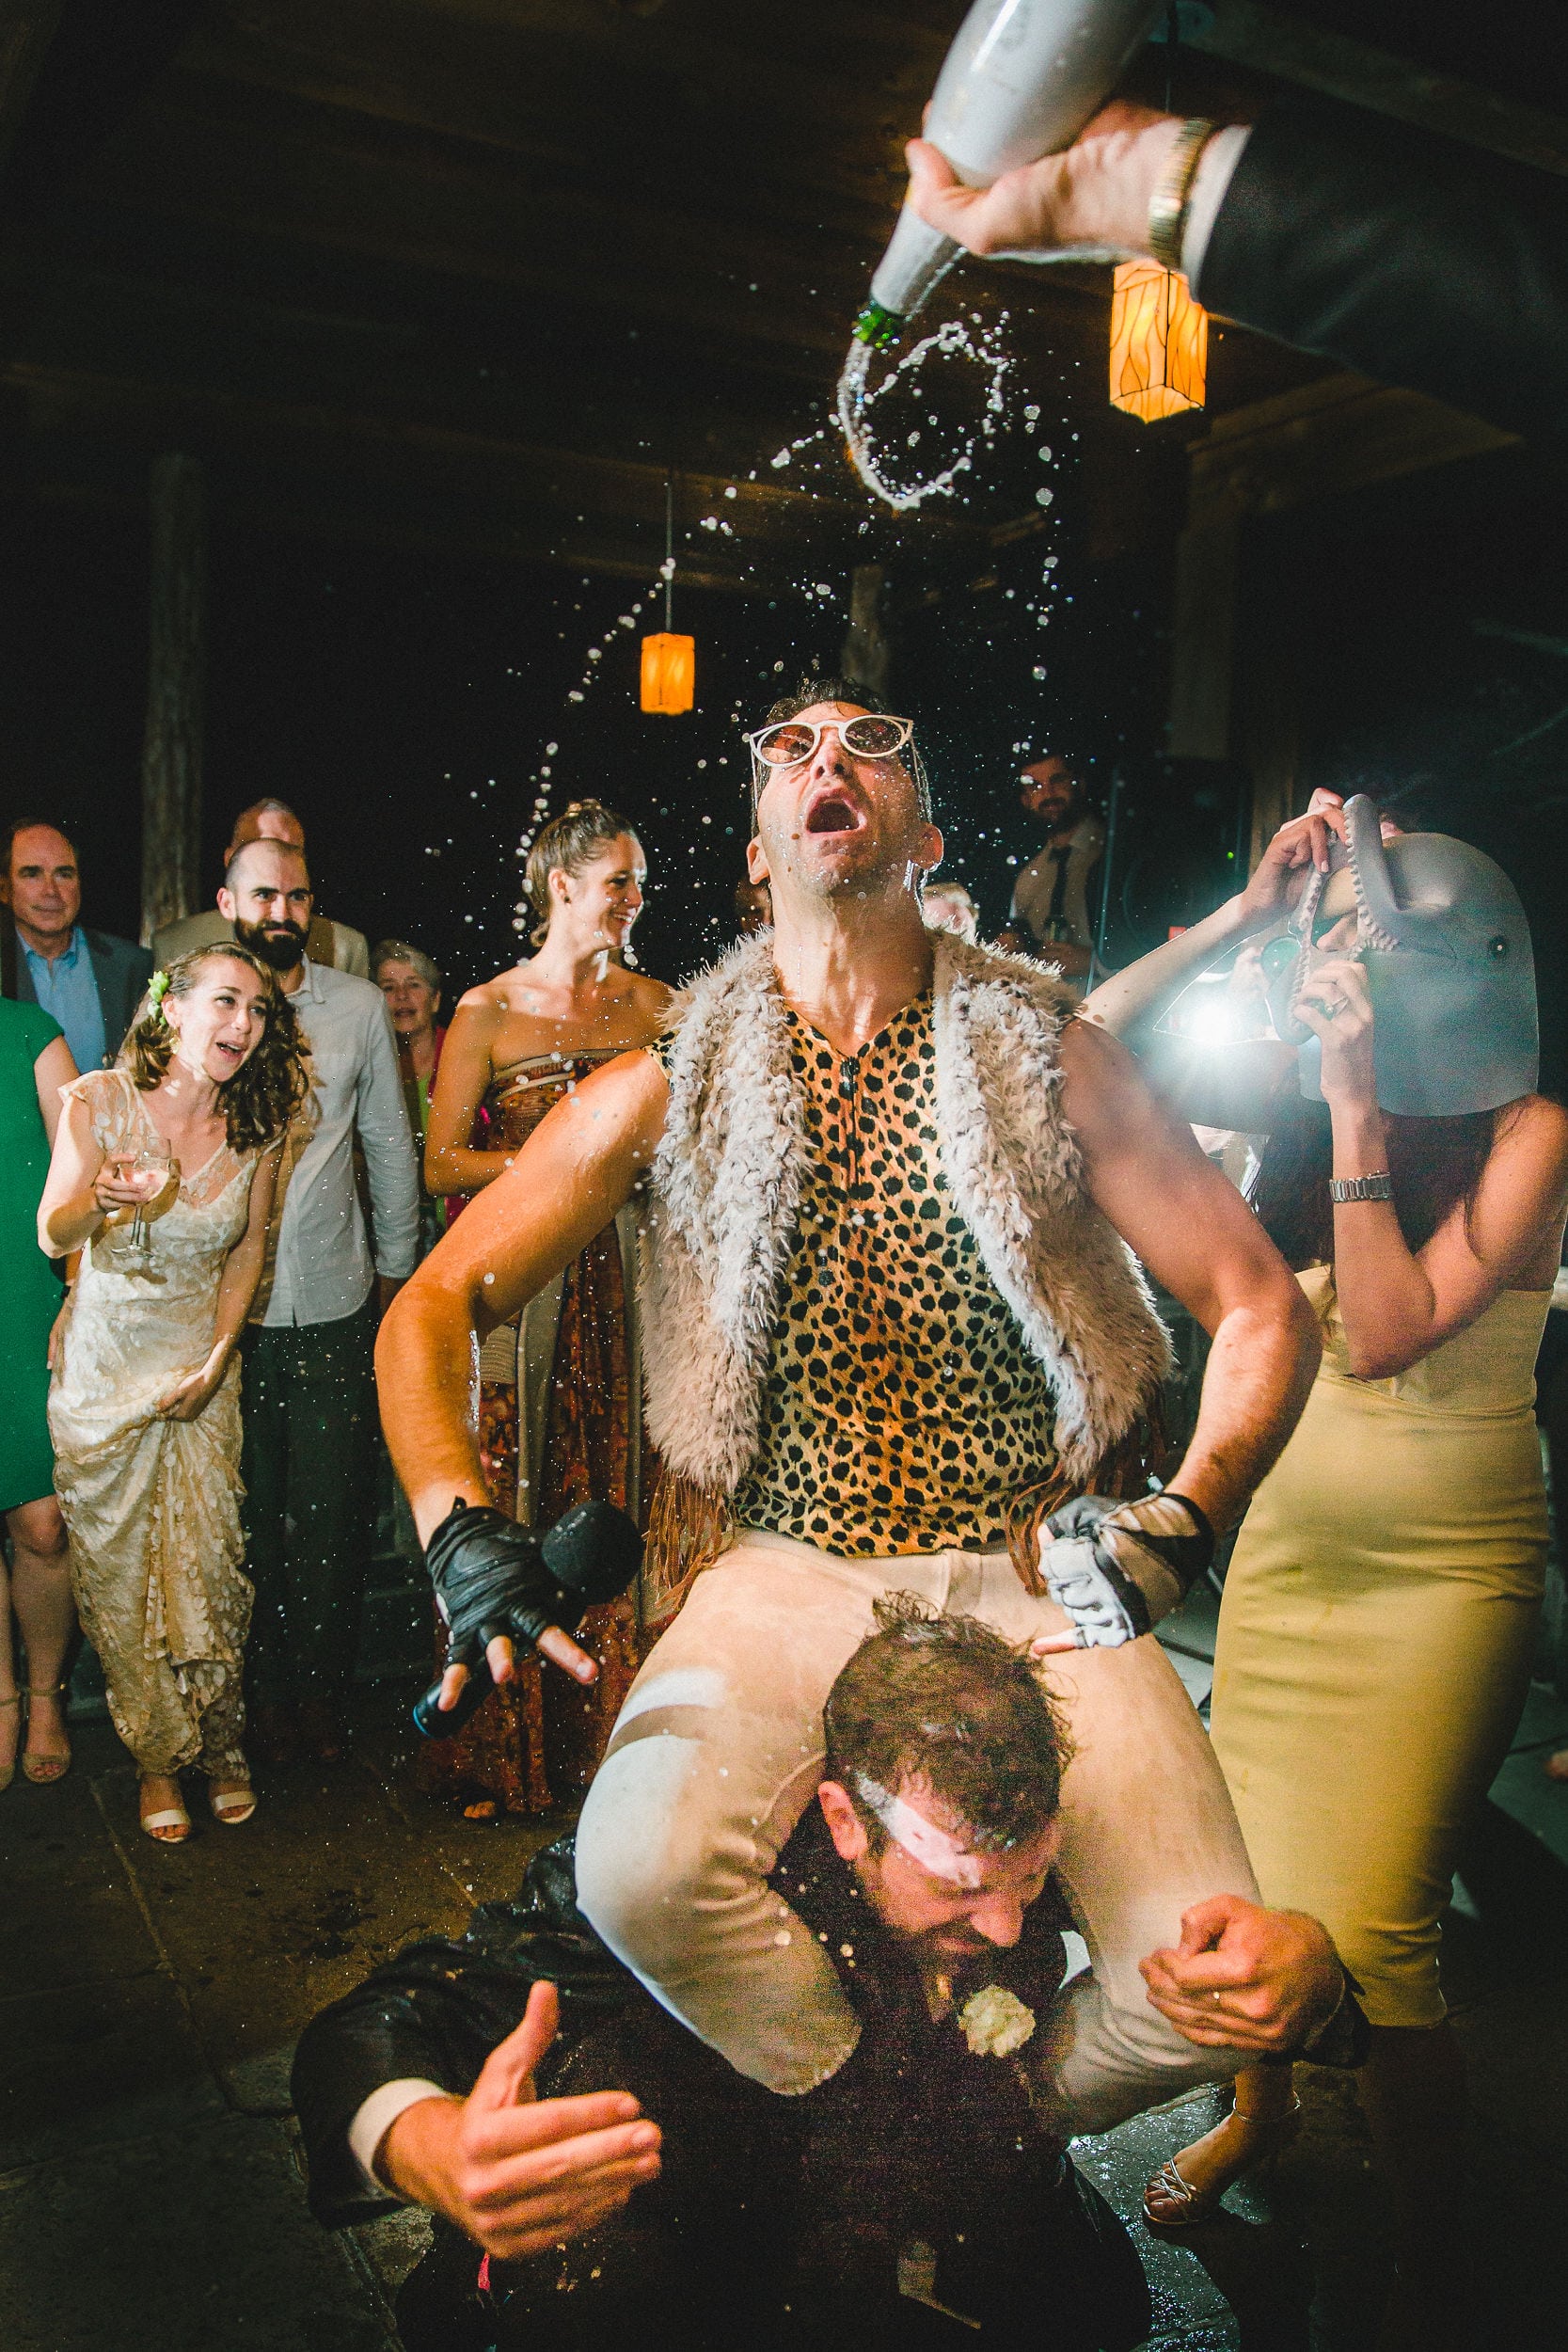 a man in a leopard print sleeveless shirt, fur vest, sunglasses, and black leather fingerless gloves is doused with a bottle of champagne as he sits on a man in a tux's shoulders at an outdoor party at night